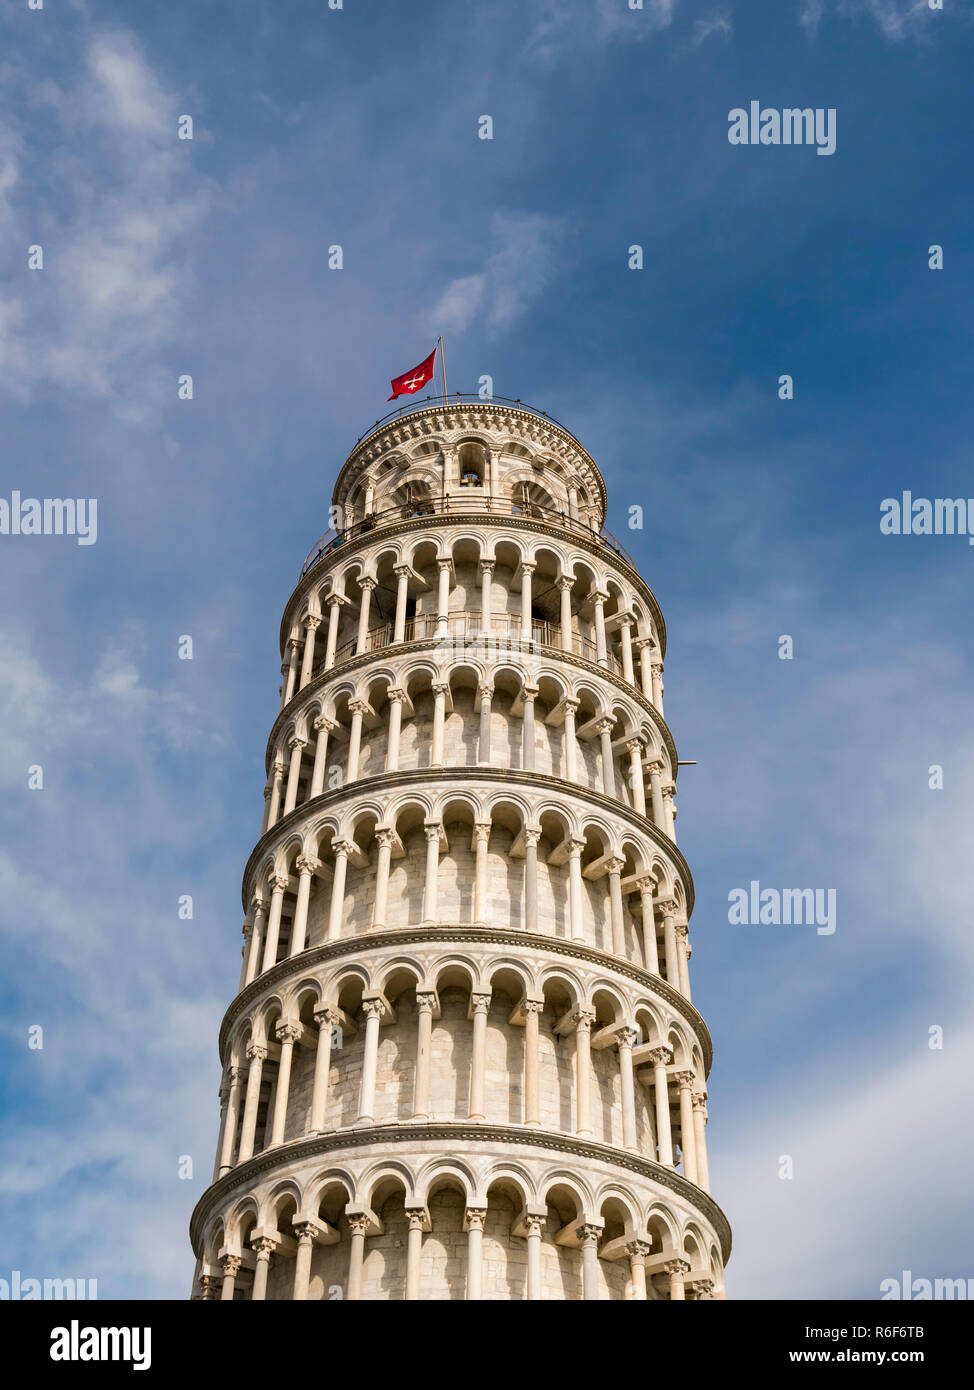 Vertical view of the Leaning Tower of Pisa, Tuscany. Stock Photo